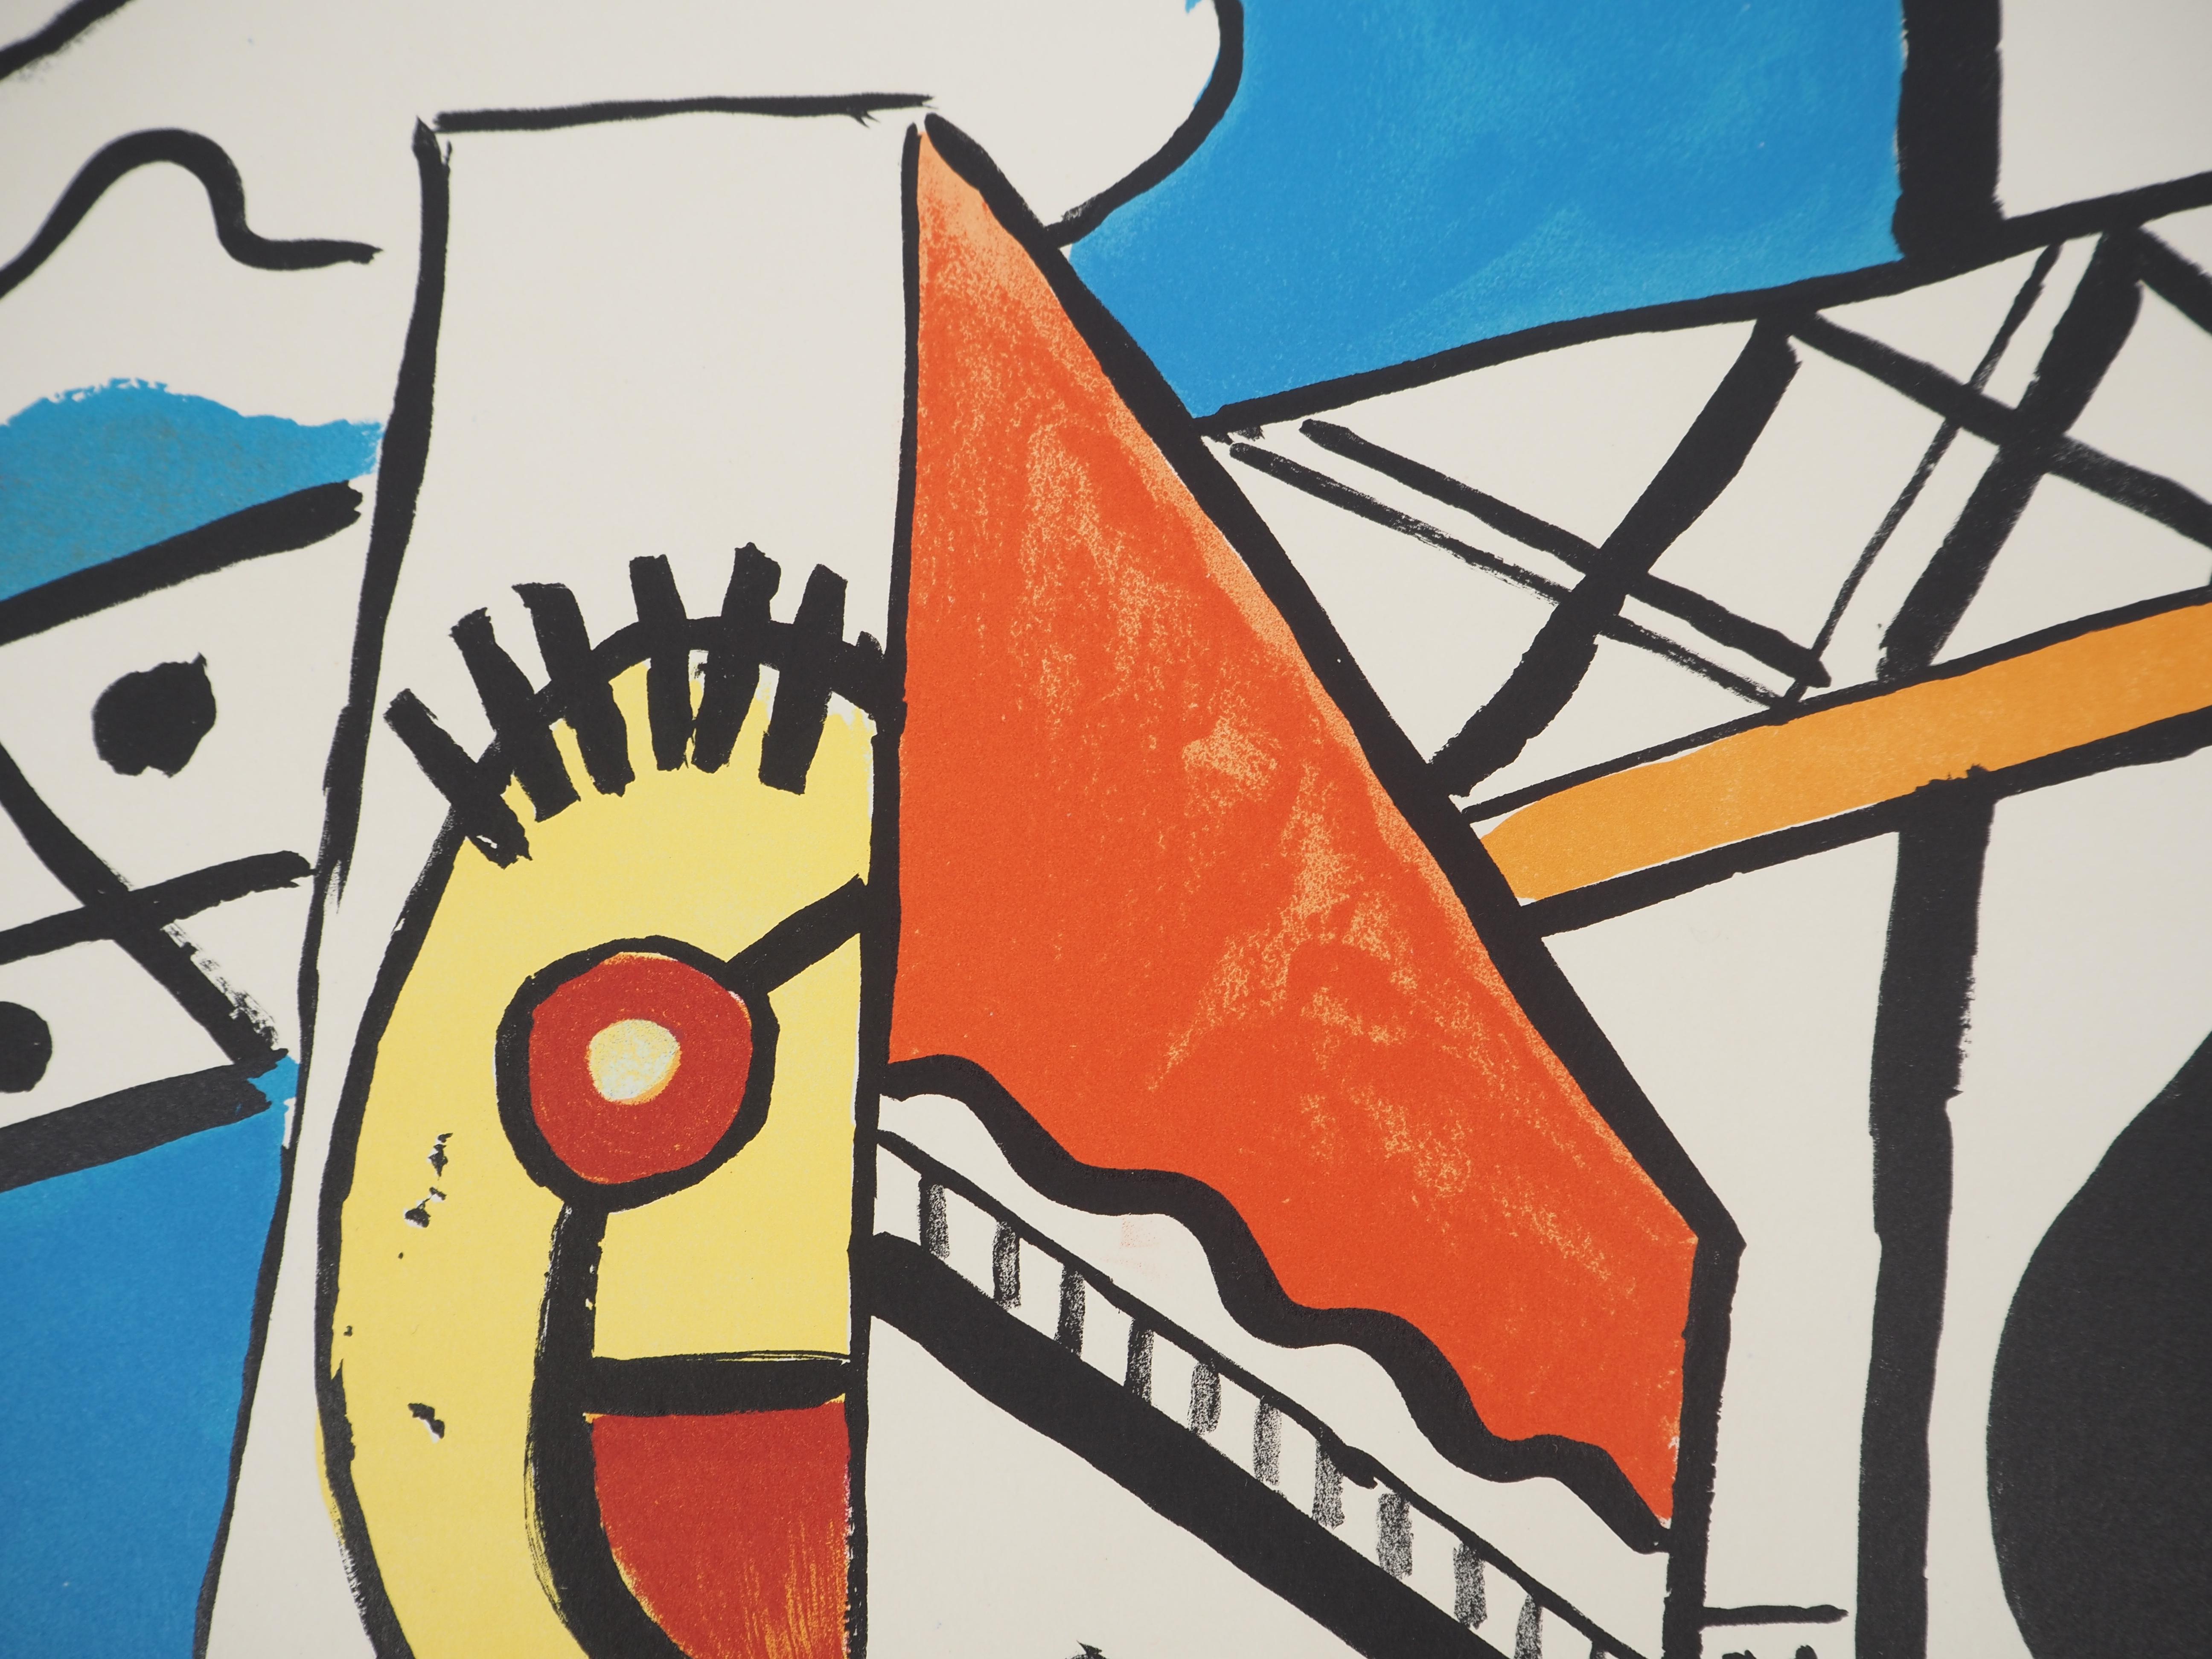 Fernand Léger
The Viaduct, 1959

Original lithograph (Atelier Mourlot)
Signed with the artist's stamp
Limited to 180 copies (Here numbered 160)
On Arches vellum  66 x 50.5 cm (c. 25.9 x 19.6 in)

REFERENCES :
- Catalog raisonne Saphire p.